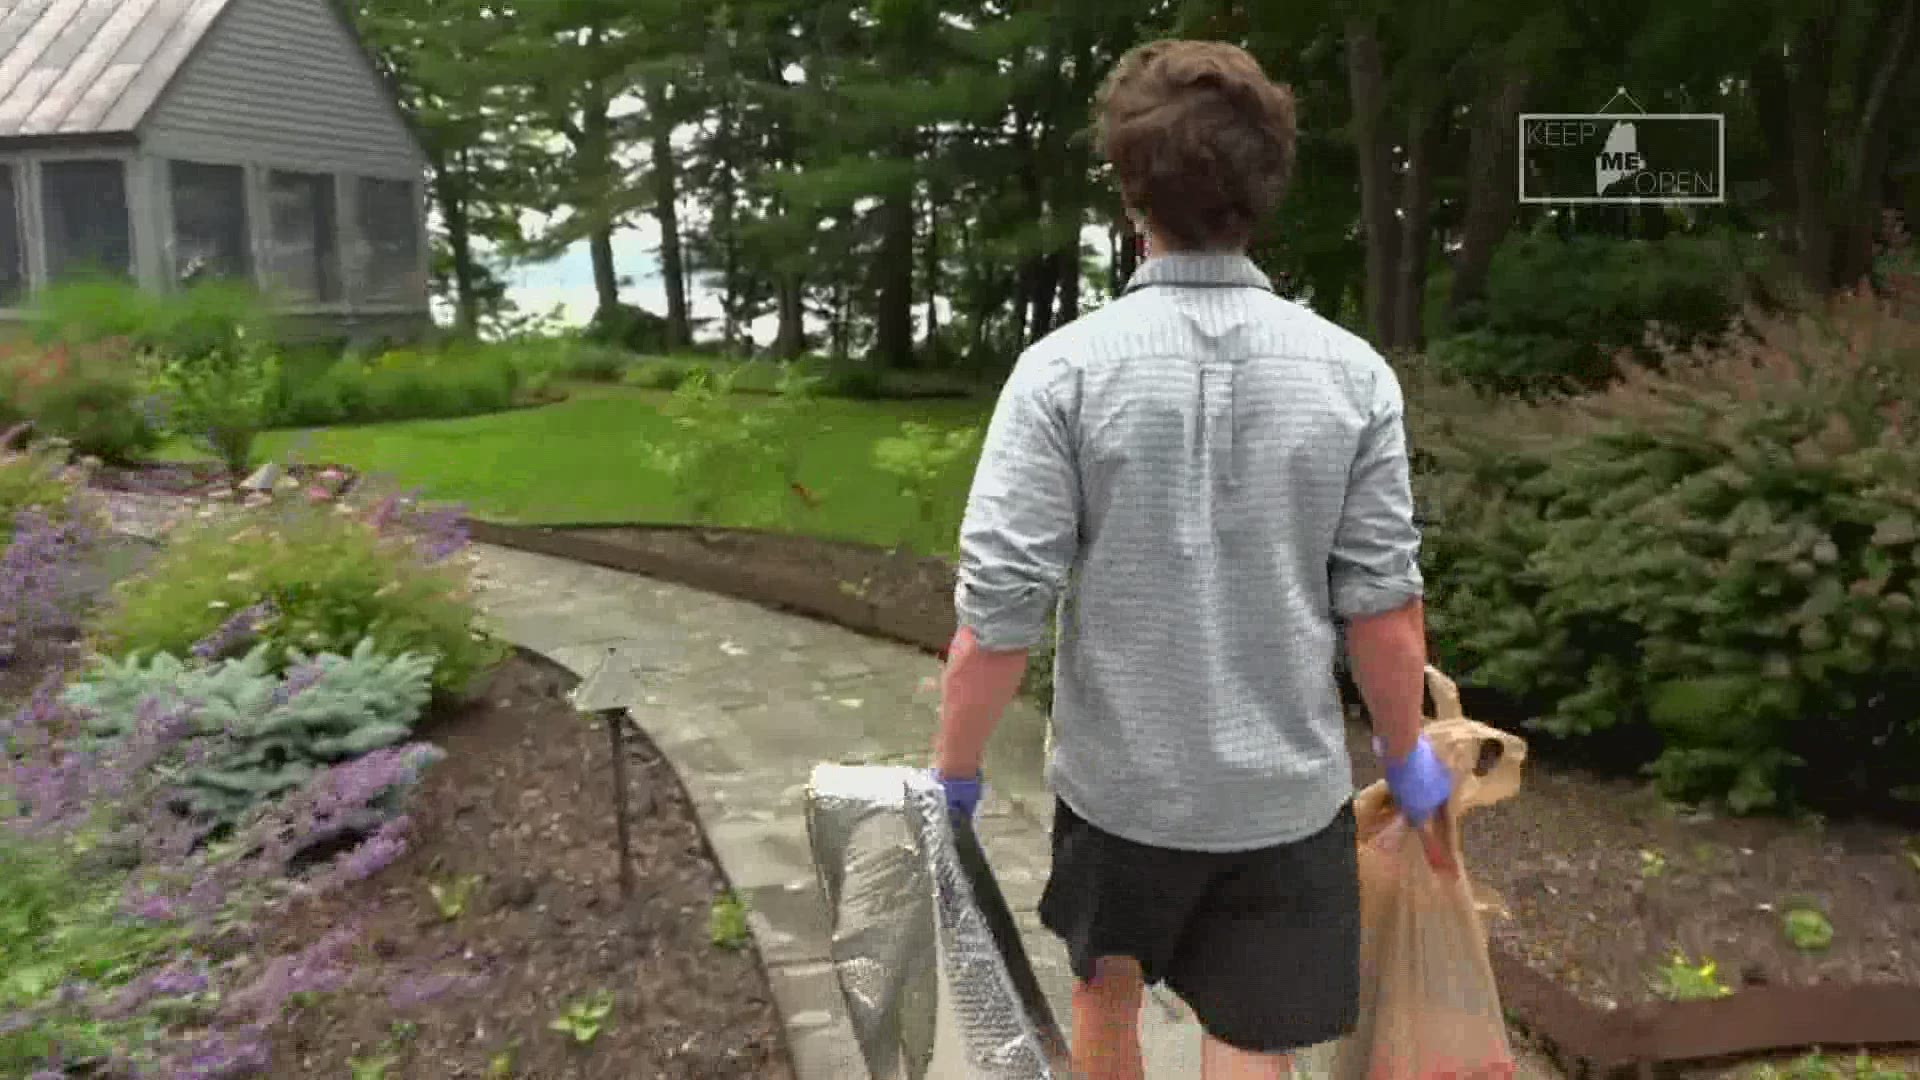 Keep ME Open: Maine teens start delivery service for quarantining tourists, those at risk